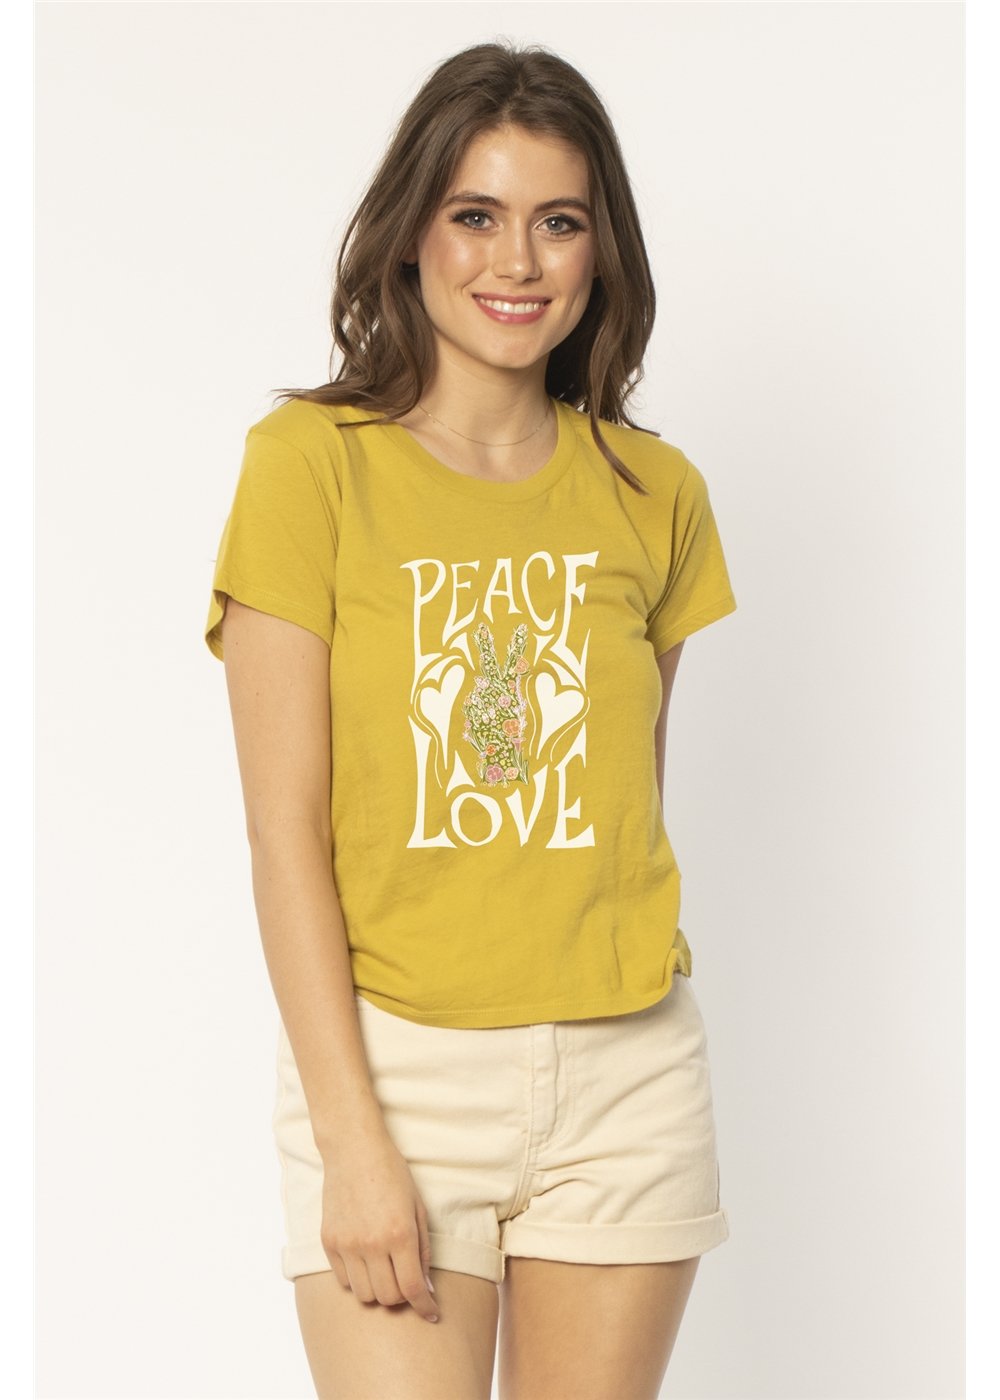 PEACE AND LOVE FITTED SS KNIT TEE